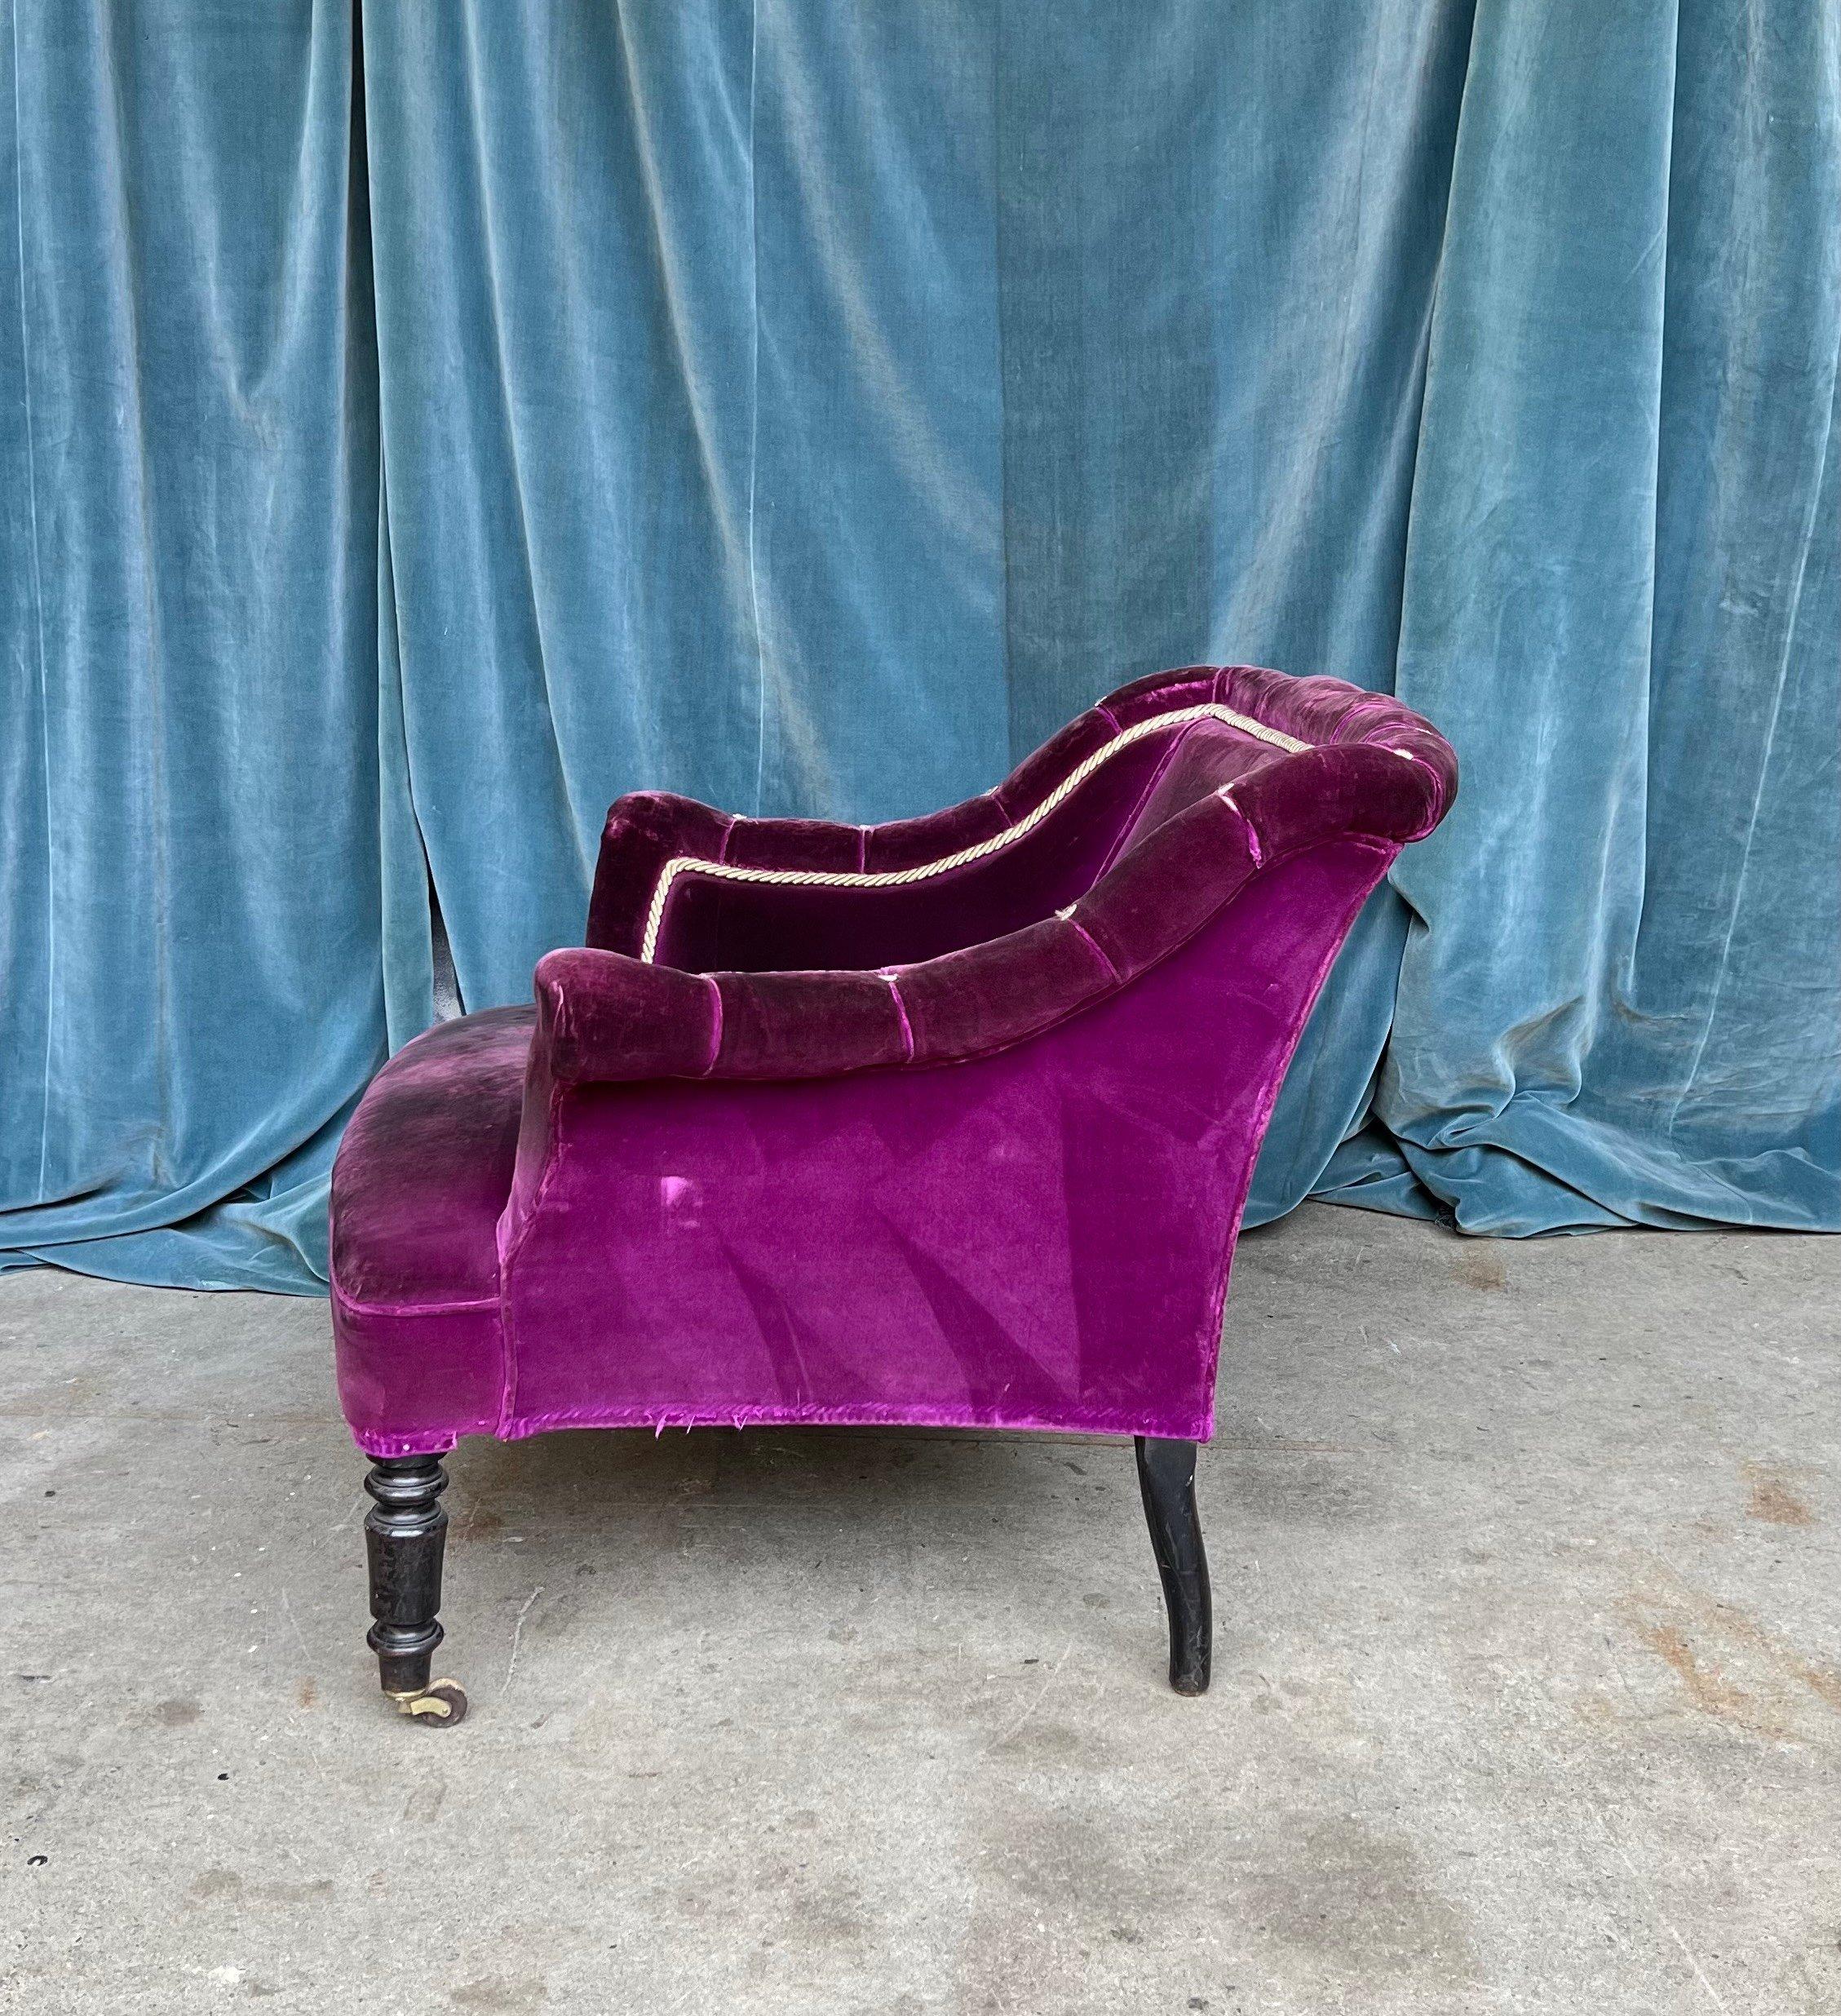 French 19th Century Armchair in Distressed Purple Velvet with White Braided Trim For Sale 1